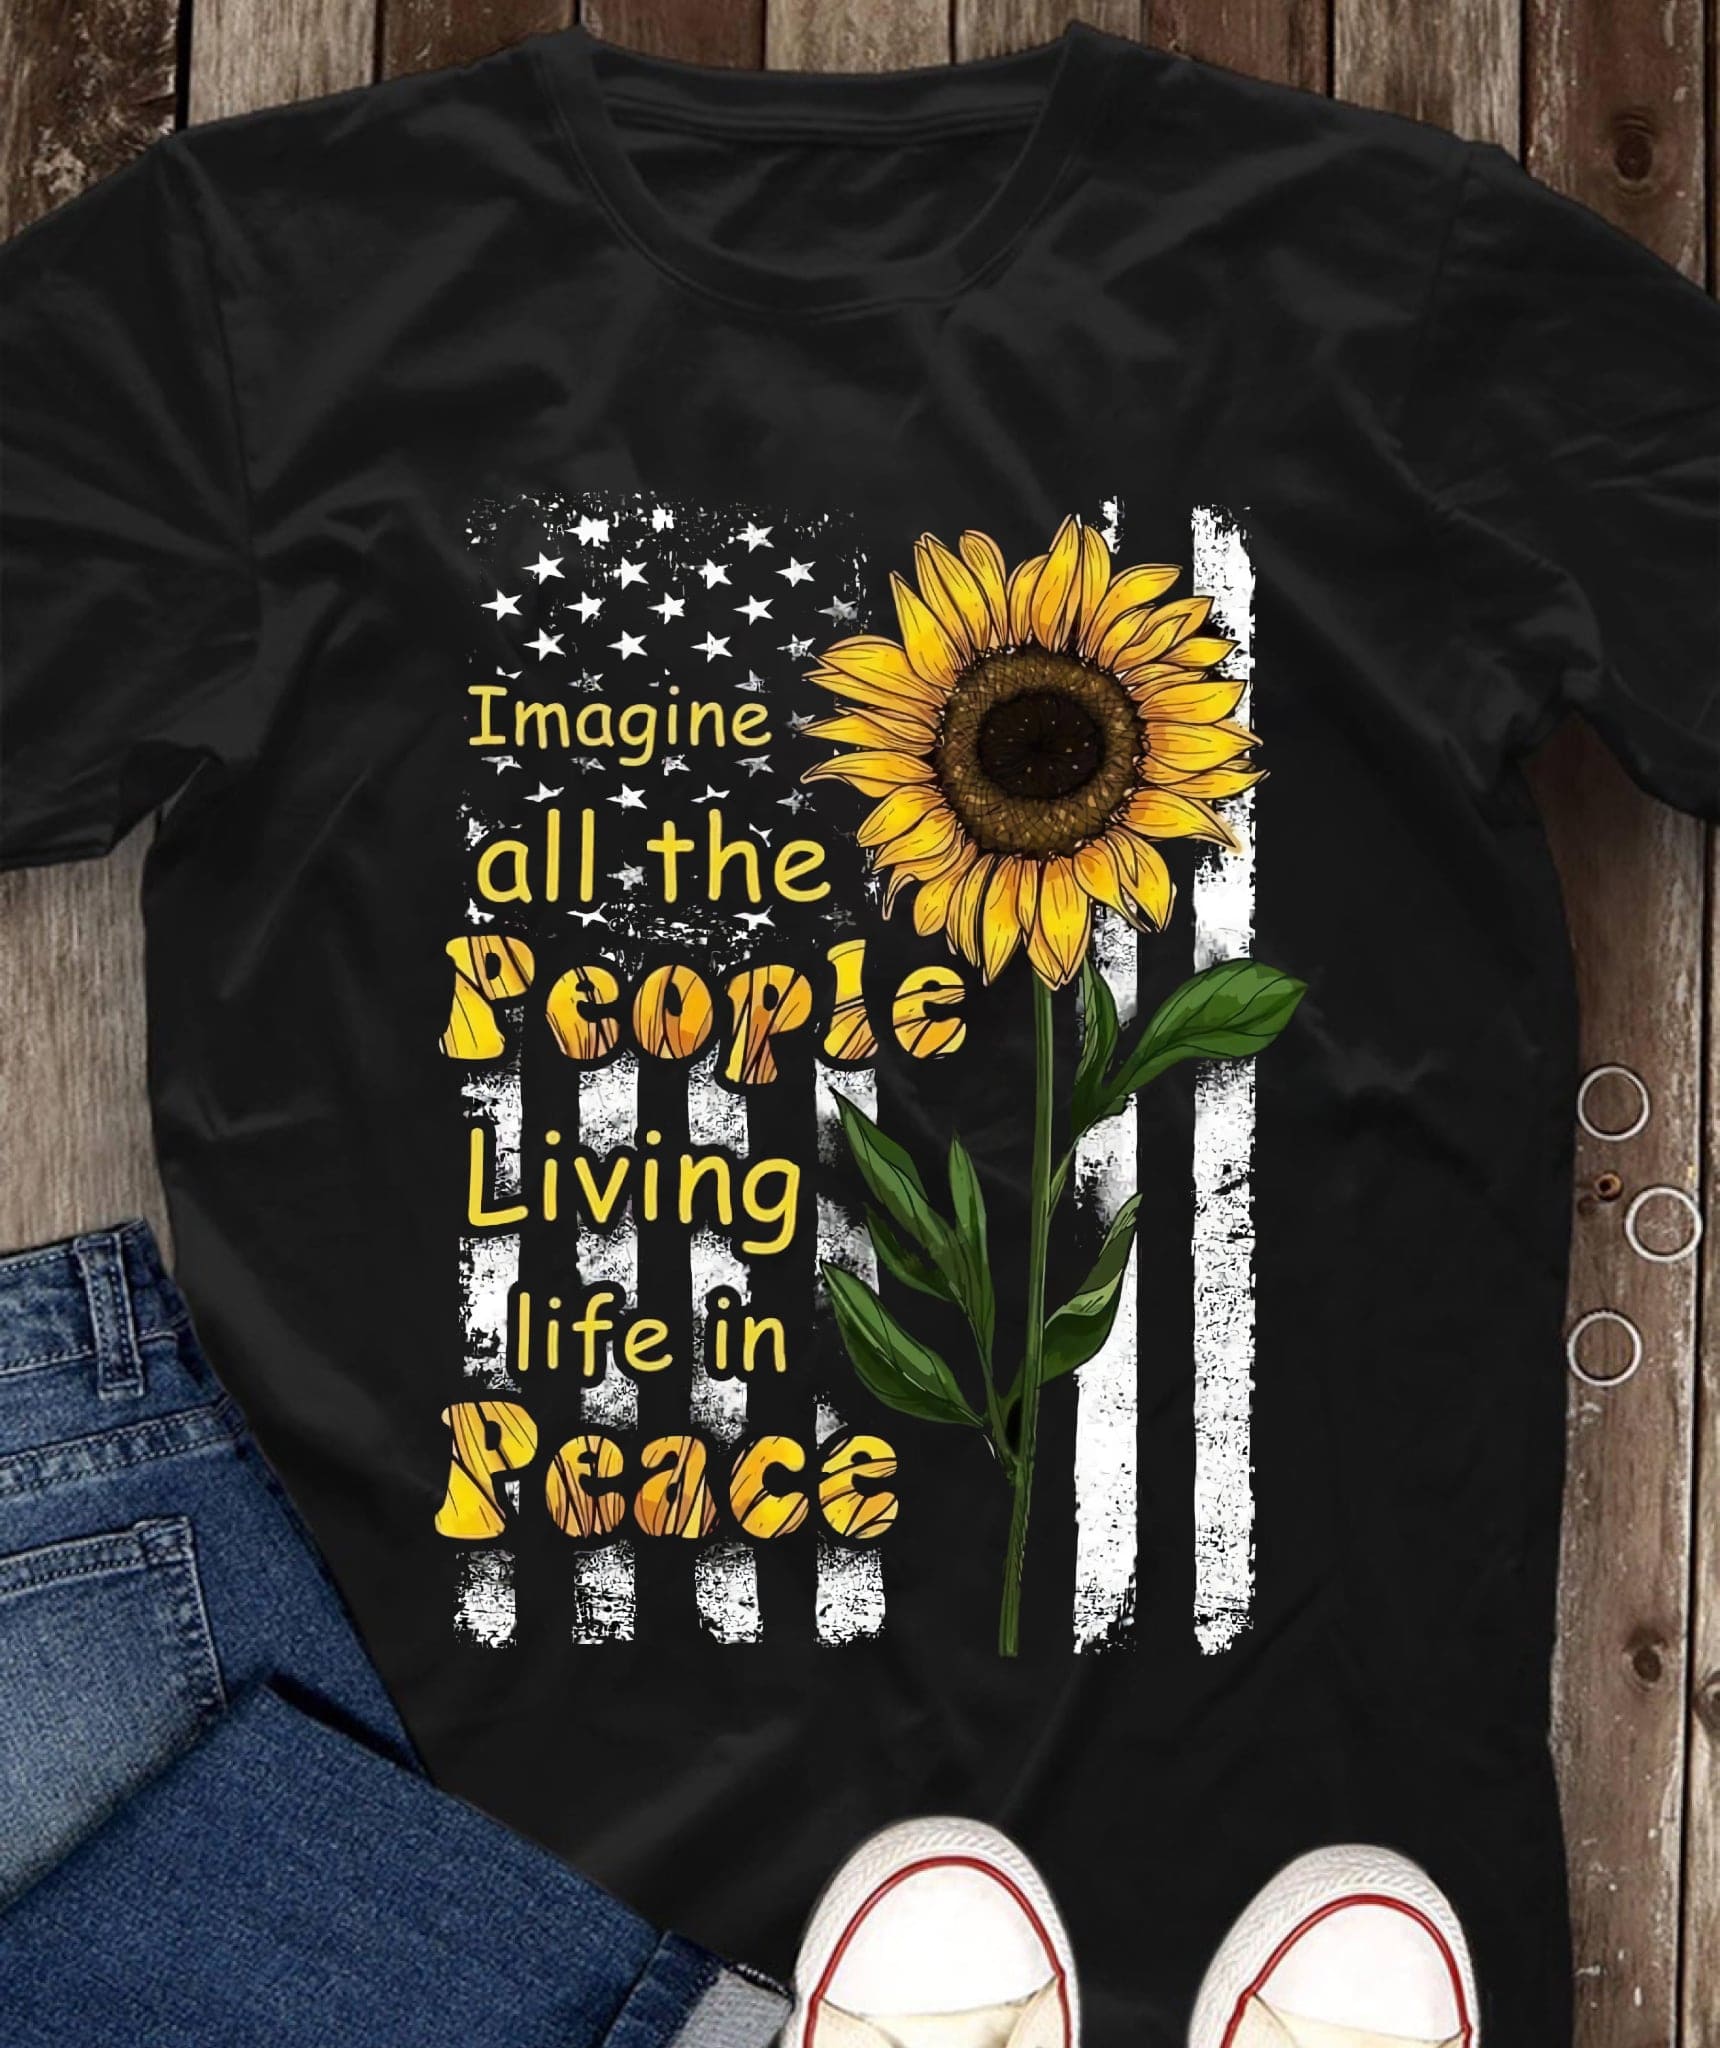 Imagine all the people living life in peace - Peaceful lifestyle, America flag